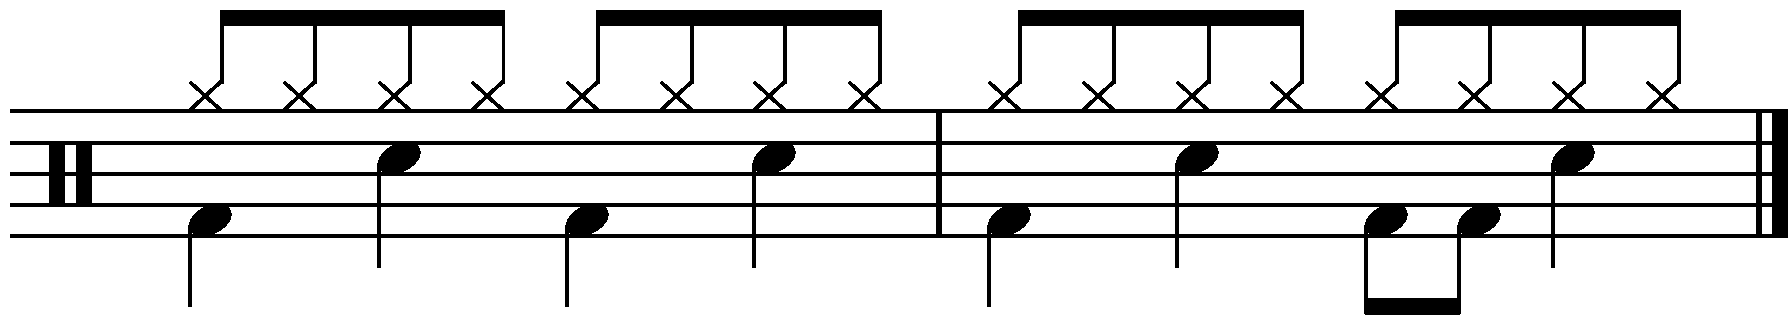 2 Bar Grooves - Example 1a